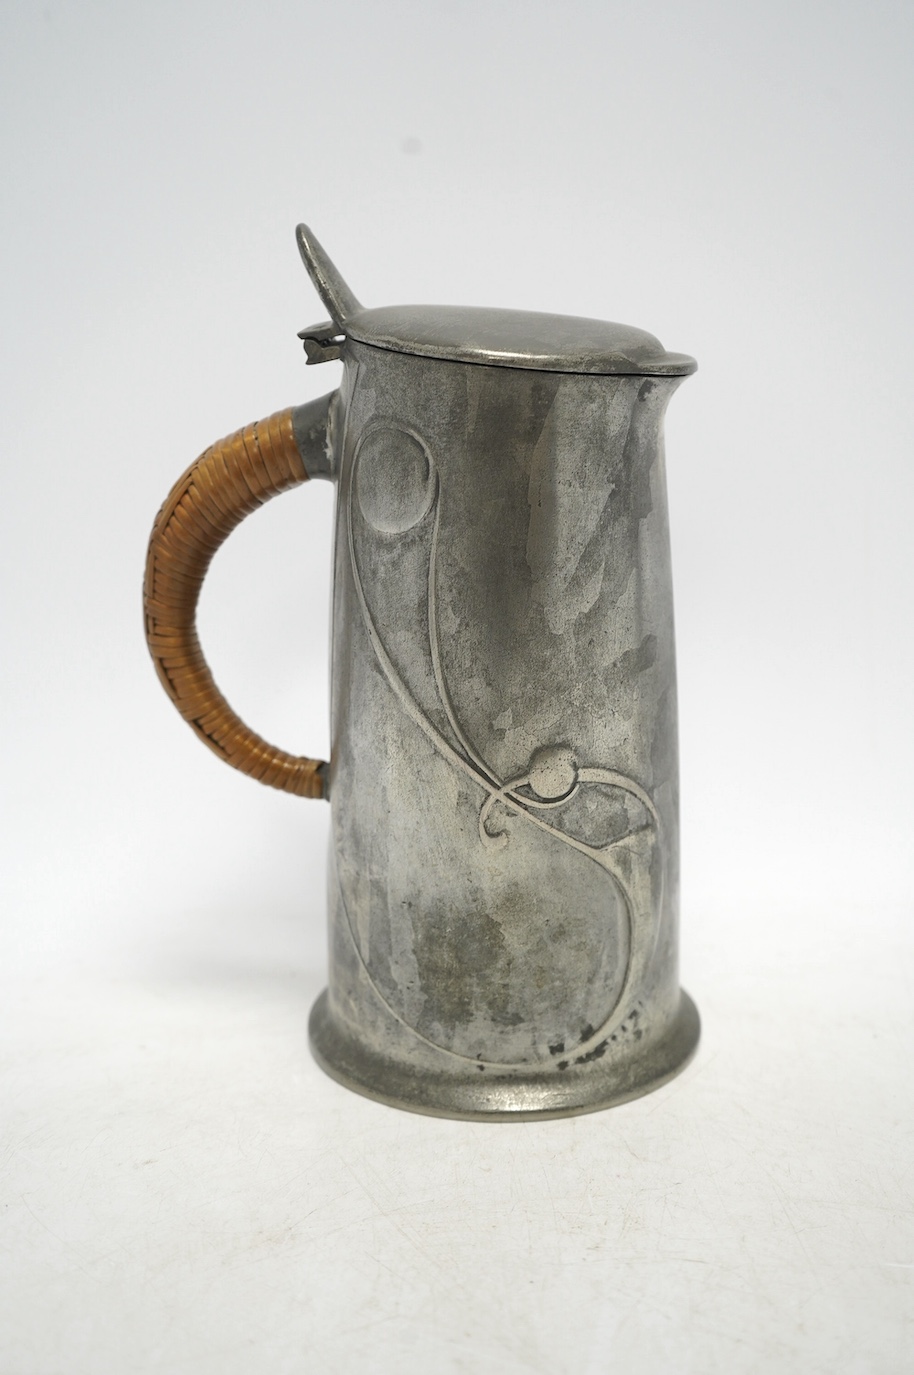 Archibald Knox, an Arts & Crafts Tudric pewter jug, with wicker handle, numbered 0305, 21cm high. Condition - good